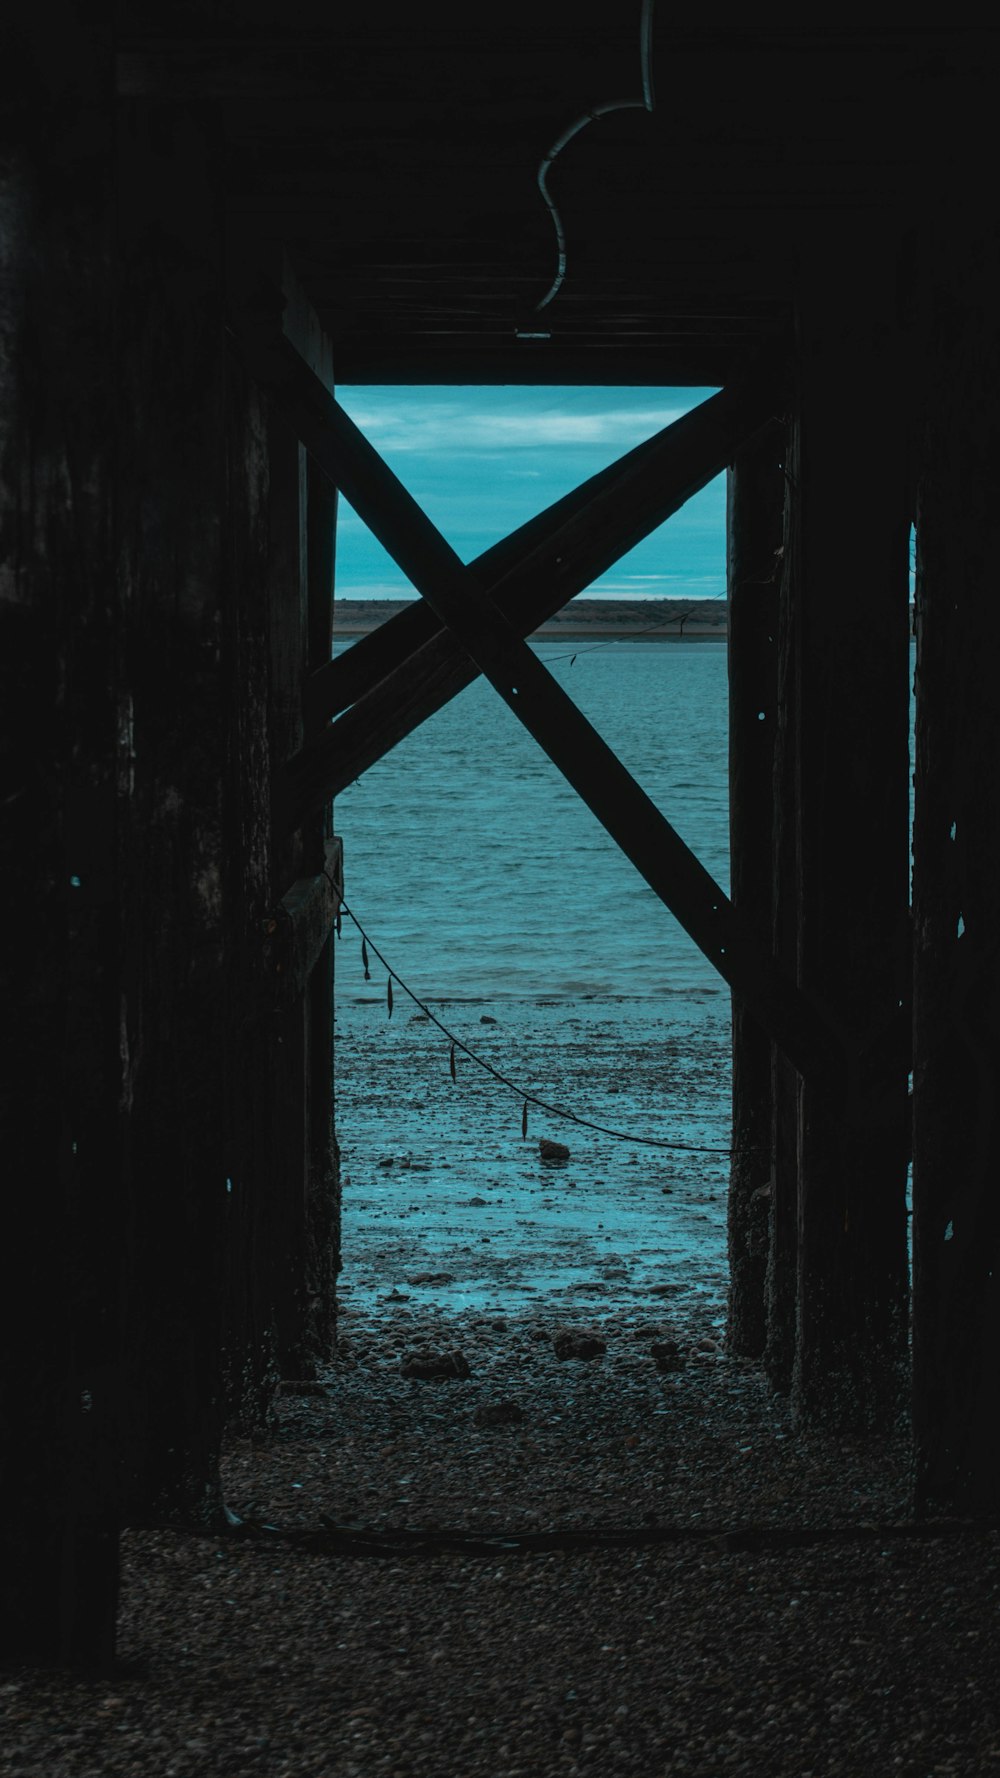 a view of a body of water through a wooden structure